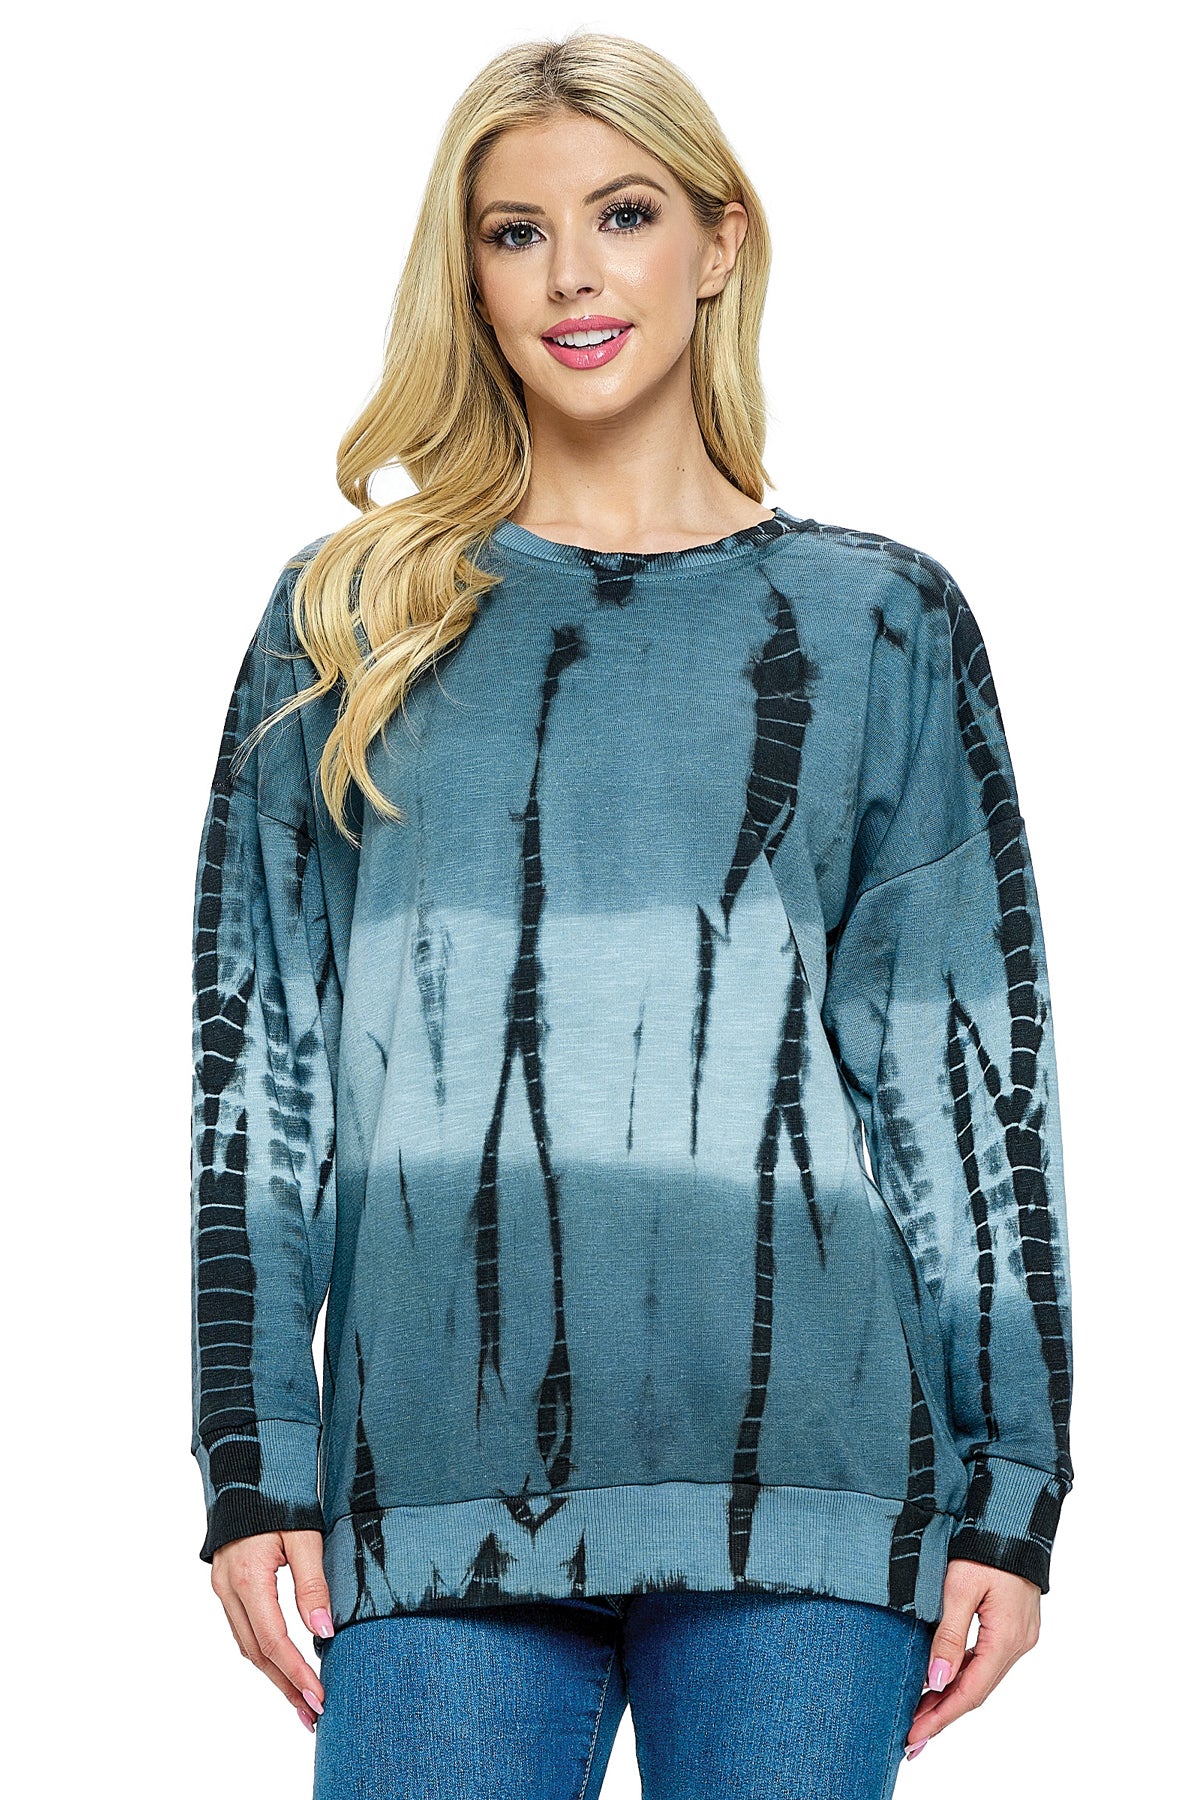 Pullover Top Boho Tie Dye Ombre Loose Fit